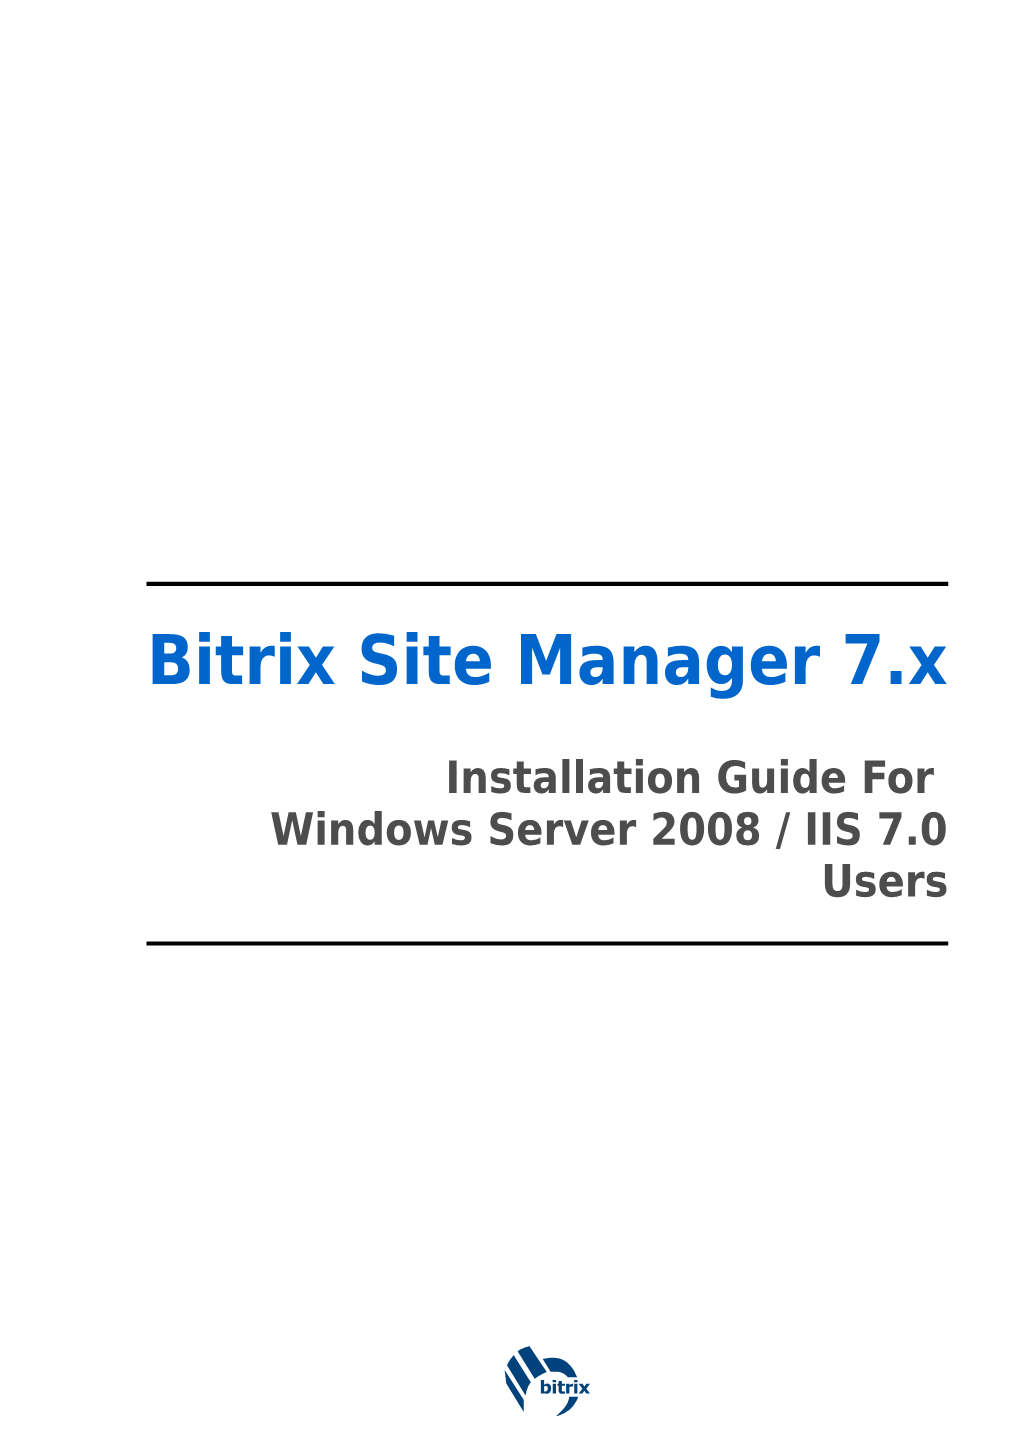 Bitrix Site Manager 7